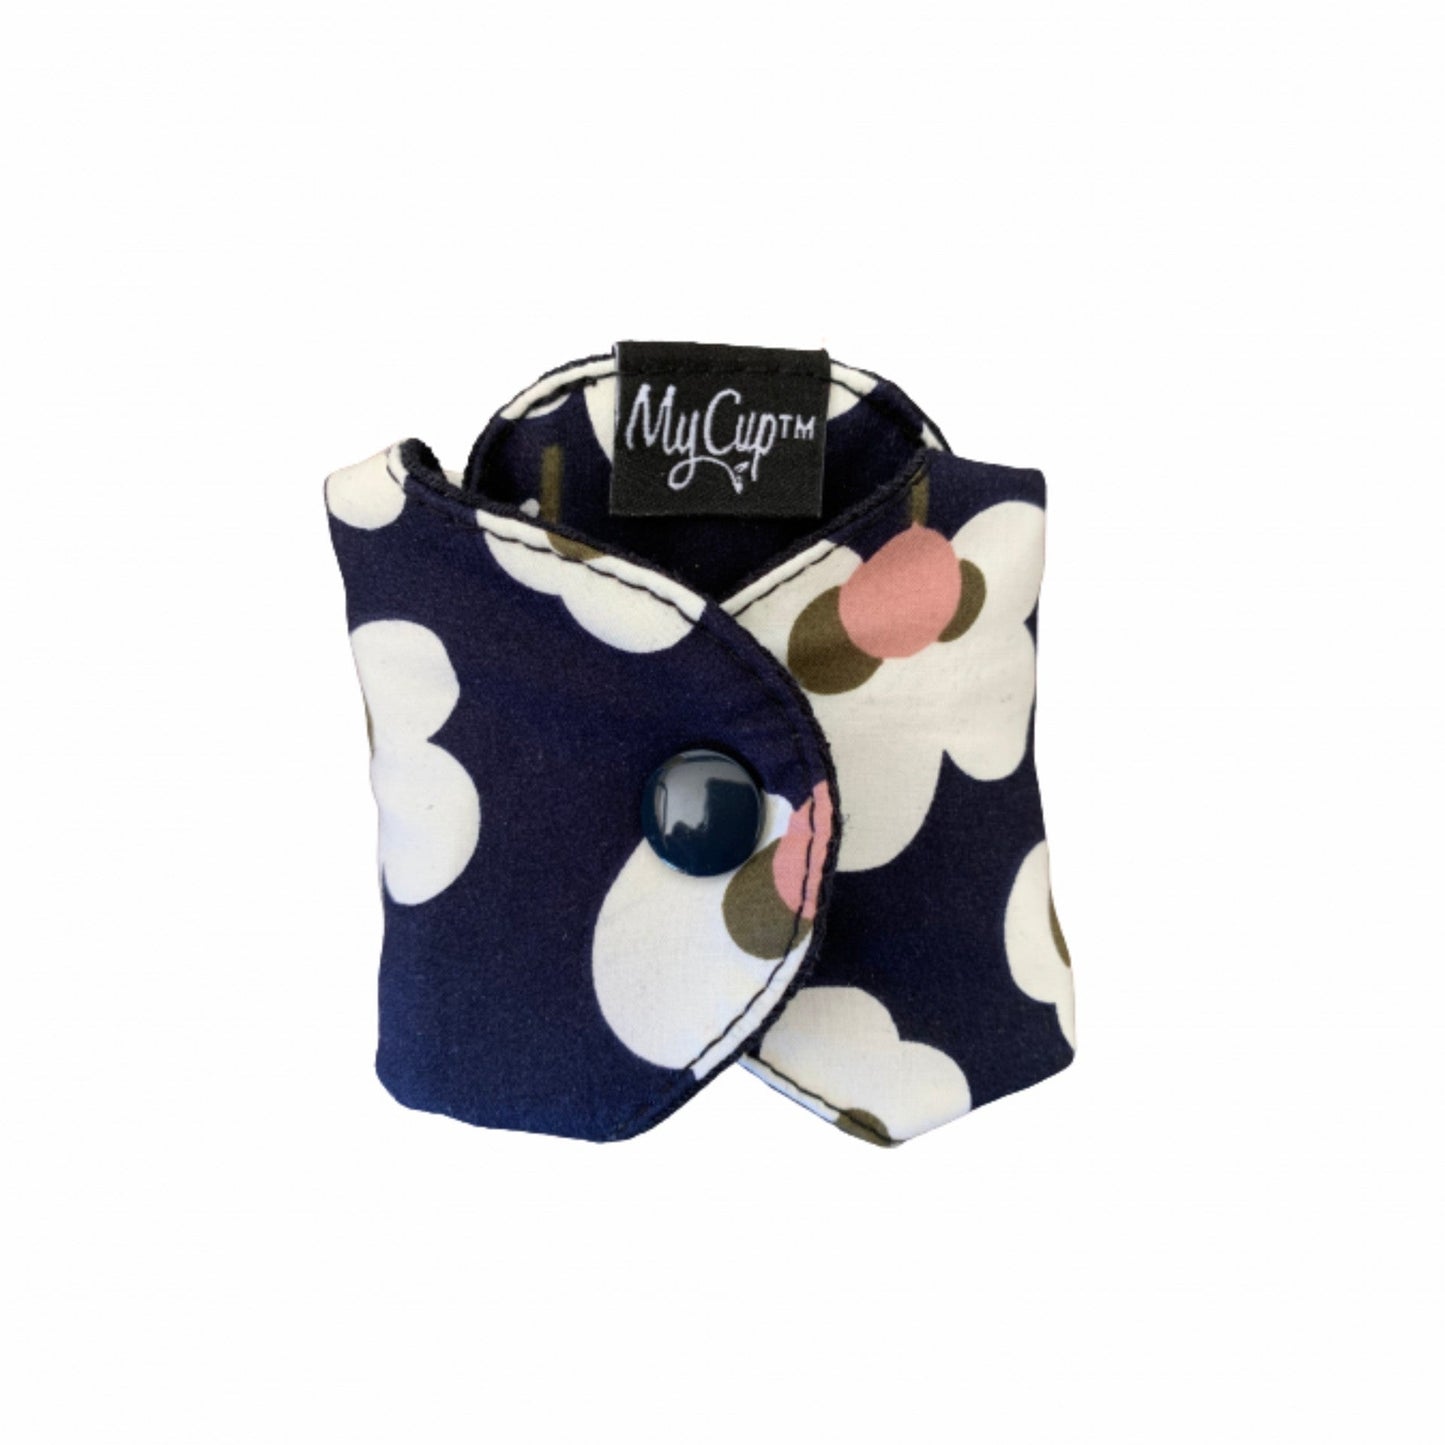 MyCup™ Reusable Panty Liner